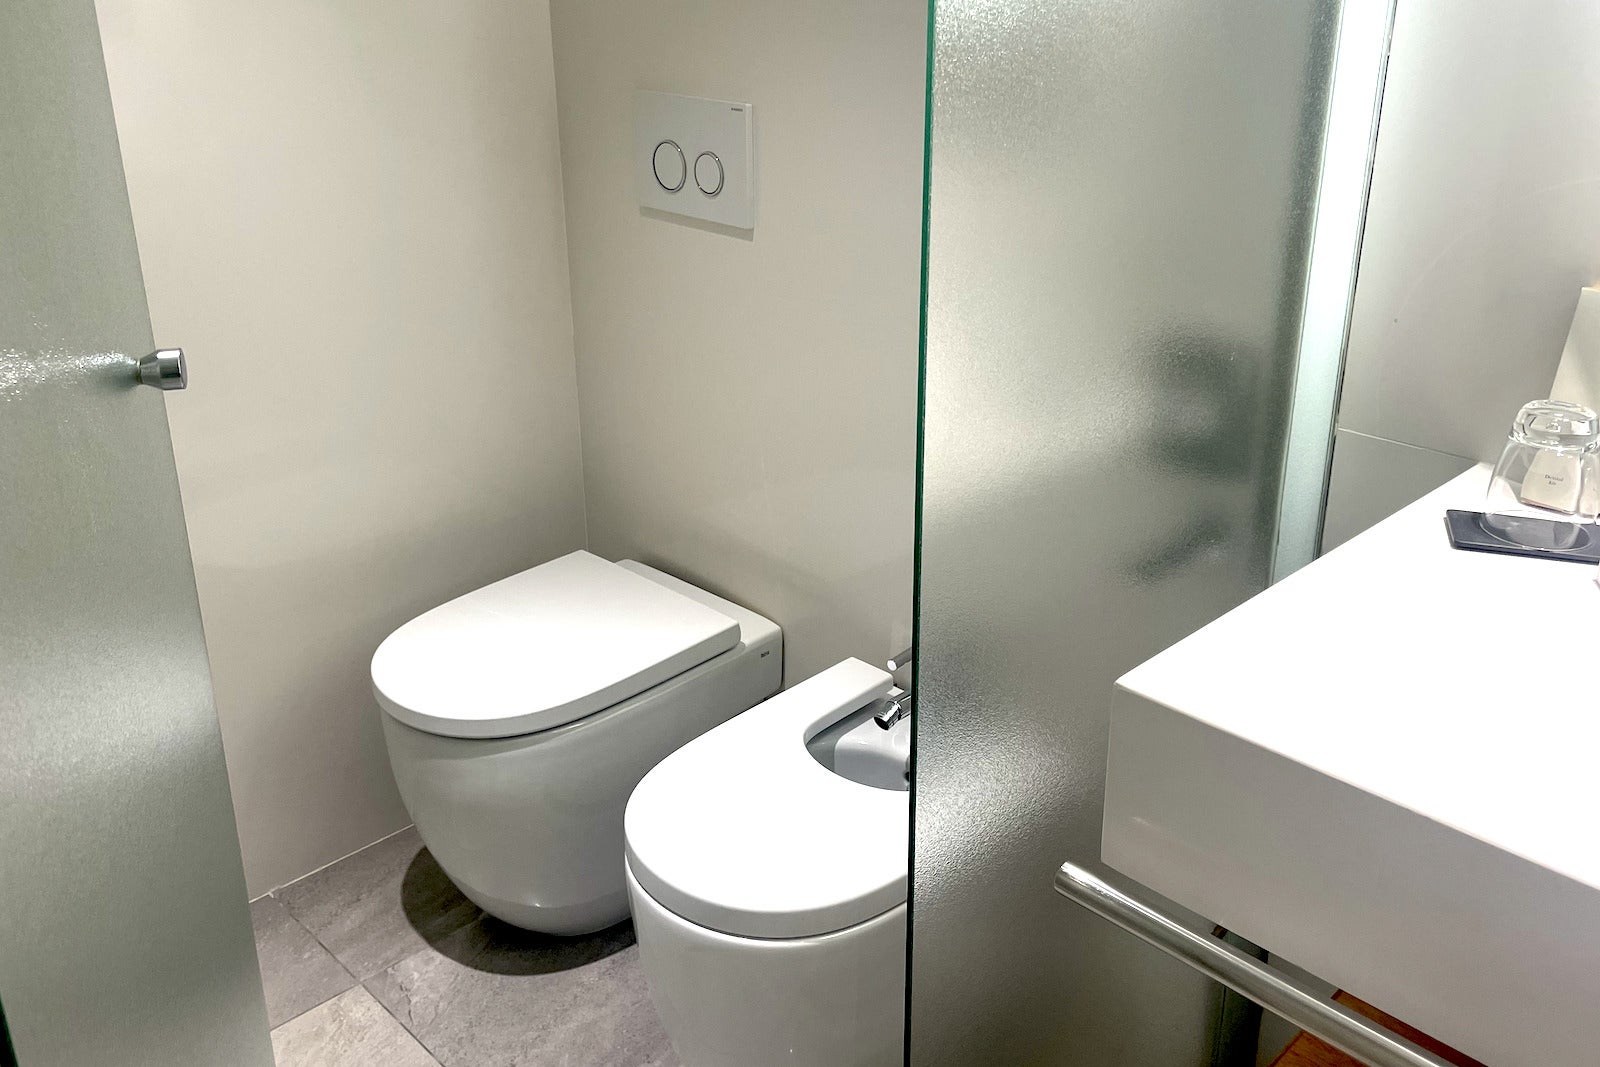 toilet and bidet in glass room